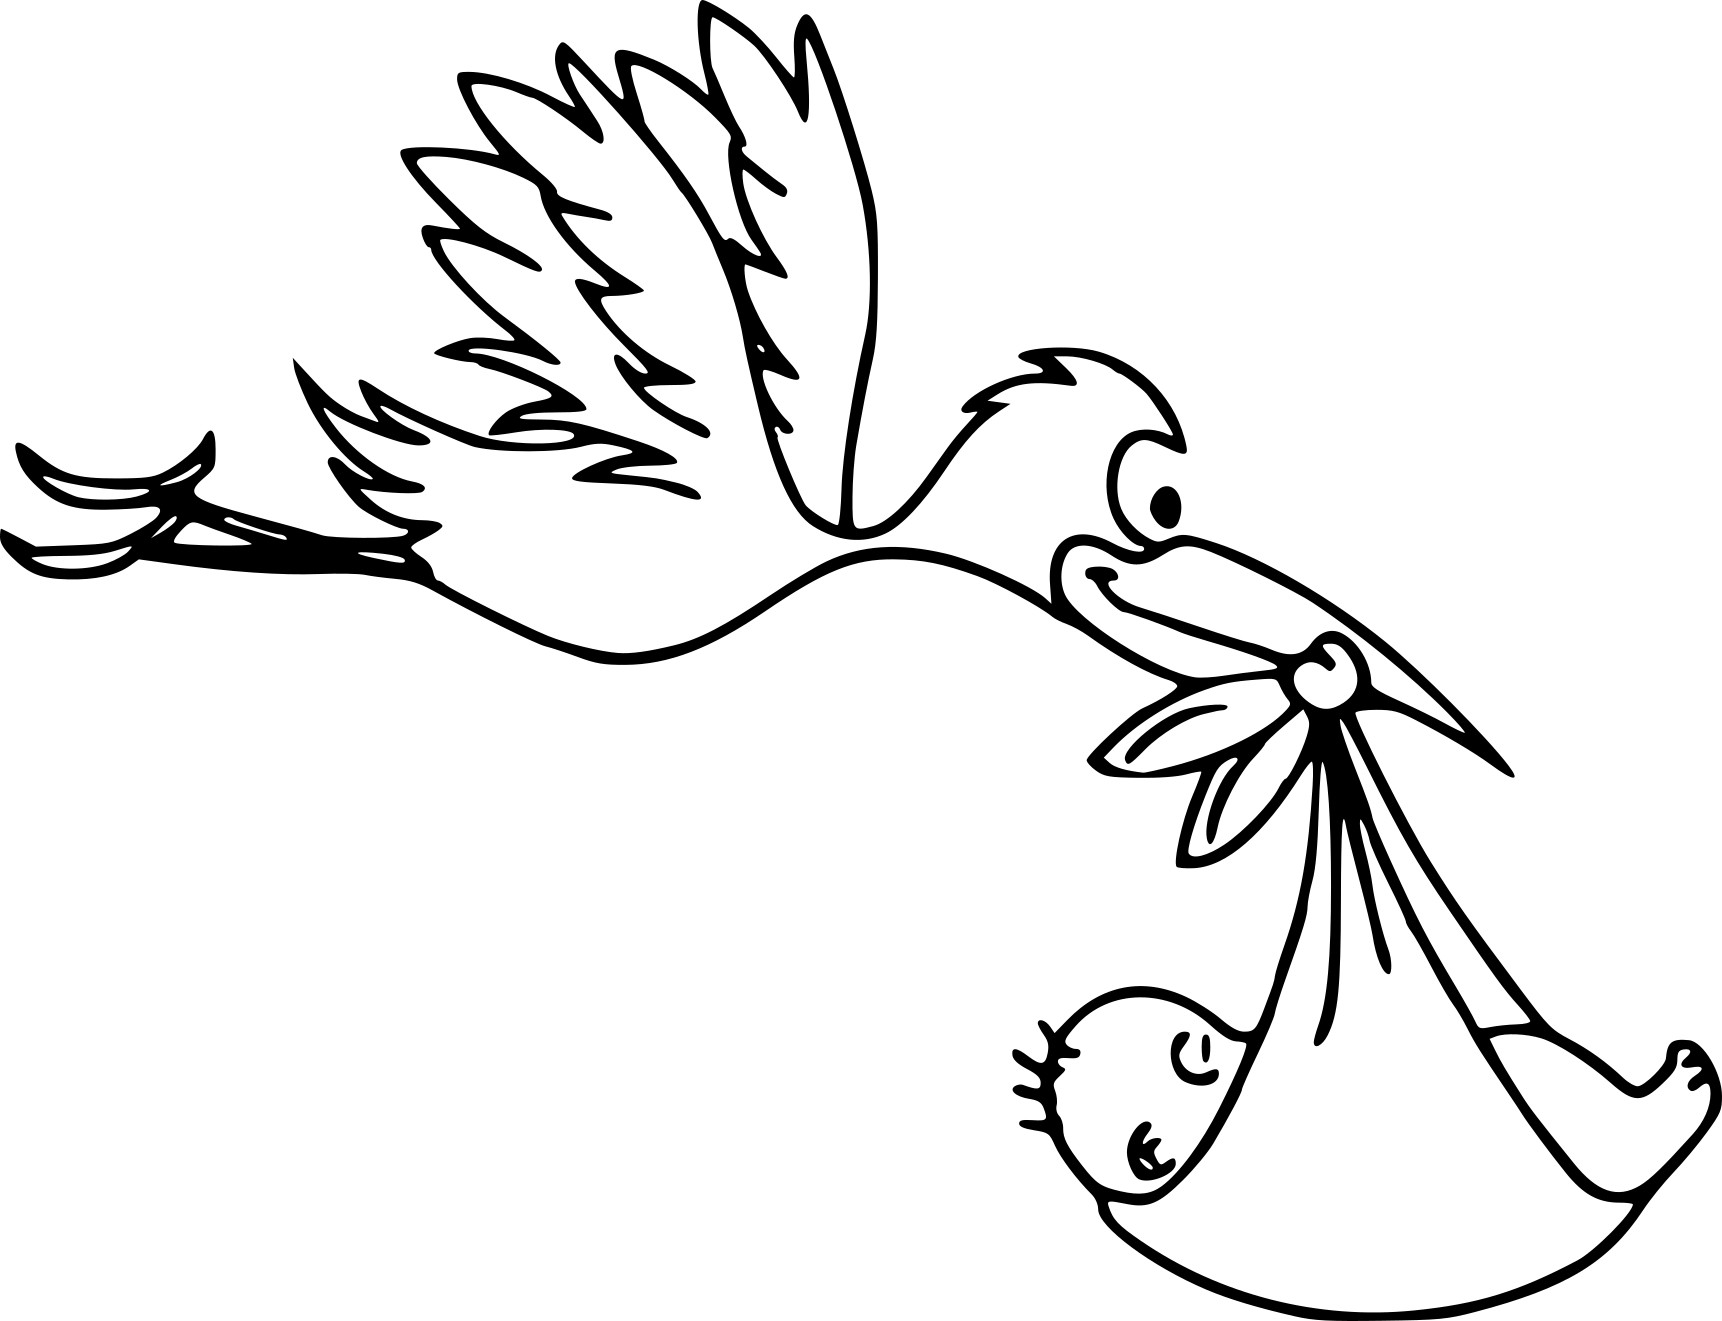 Stork And A Baby coloring page